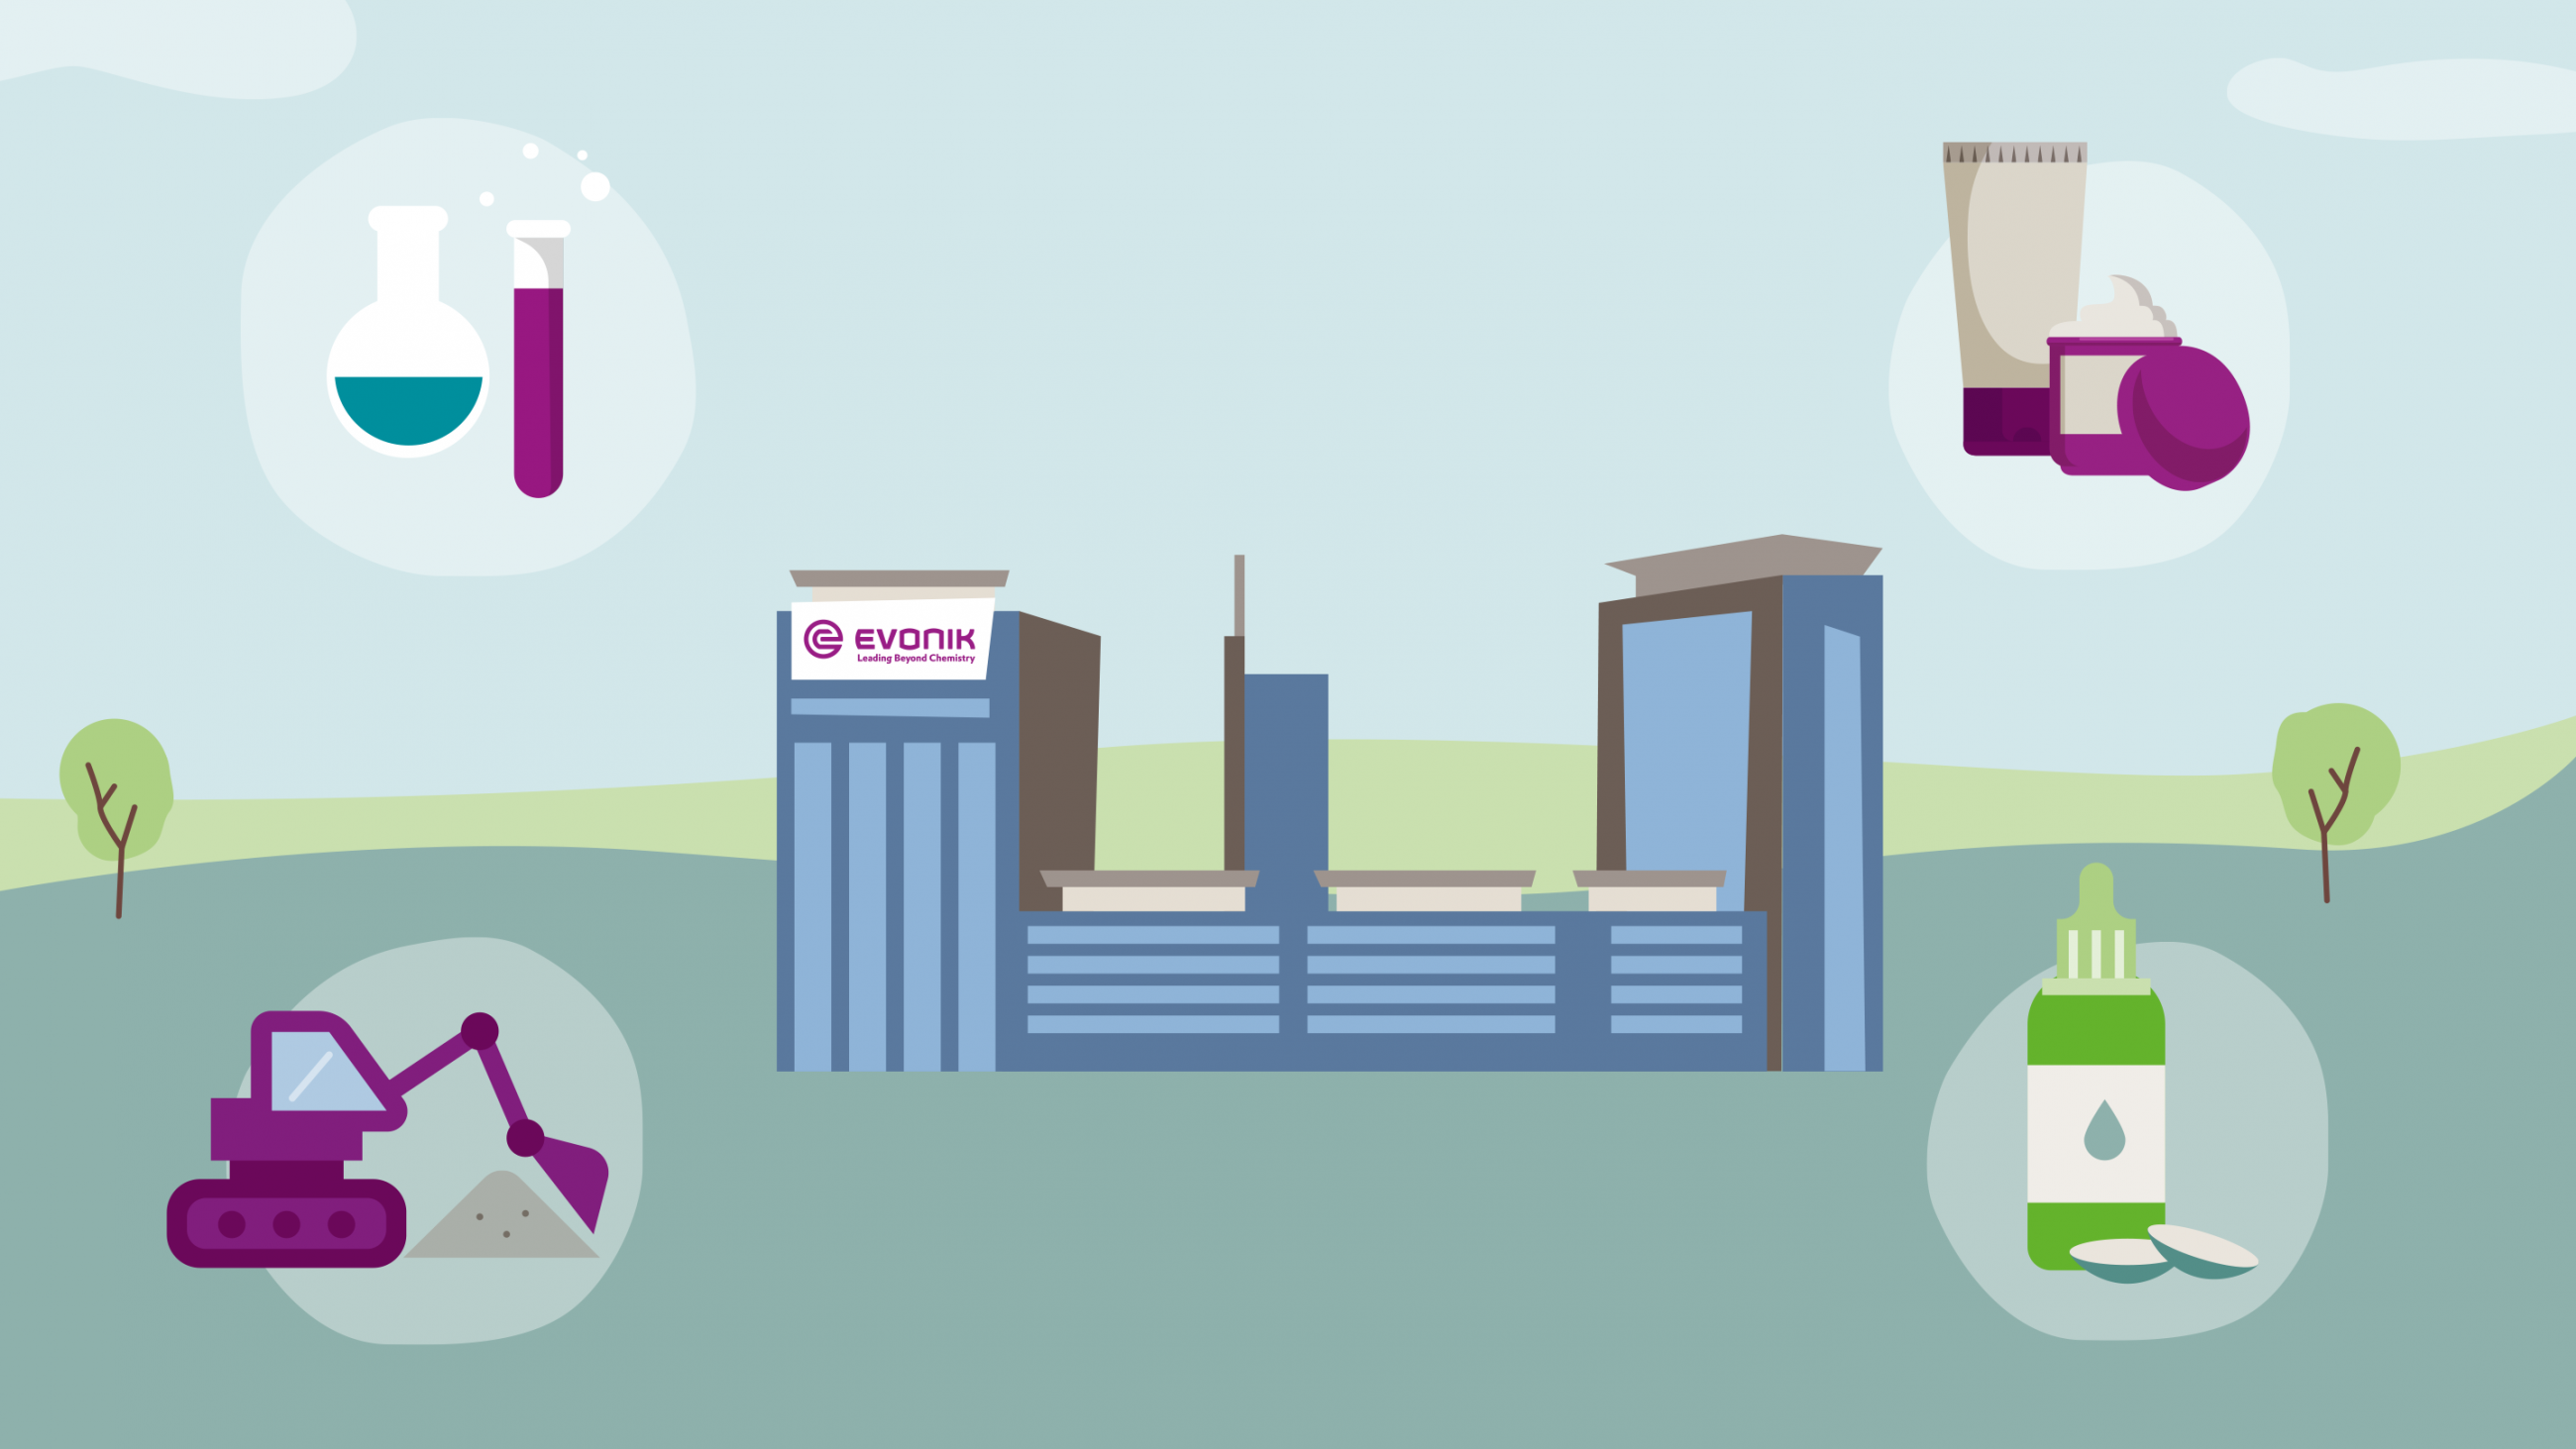 Evonik Active Oxygens produces persulfates for a range of applications and industries, from soil remediation and the cosmetics industry to chemical synthesis.